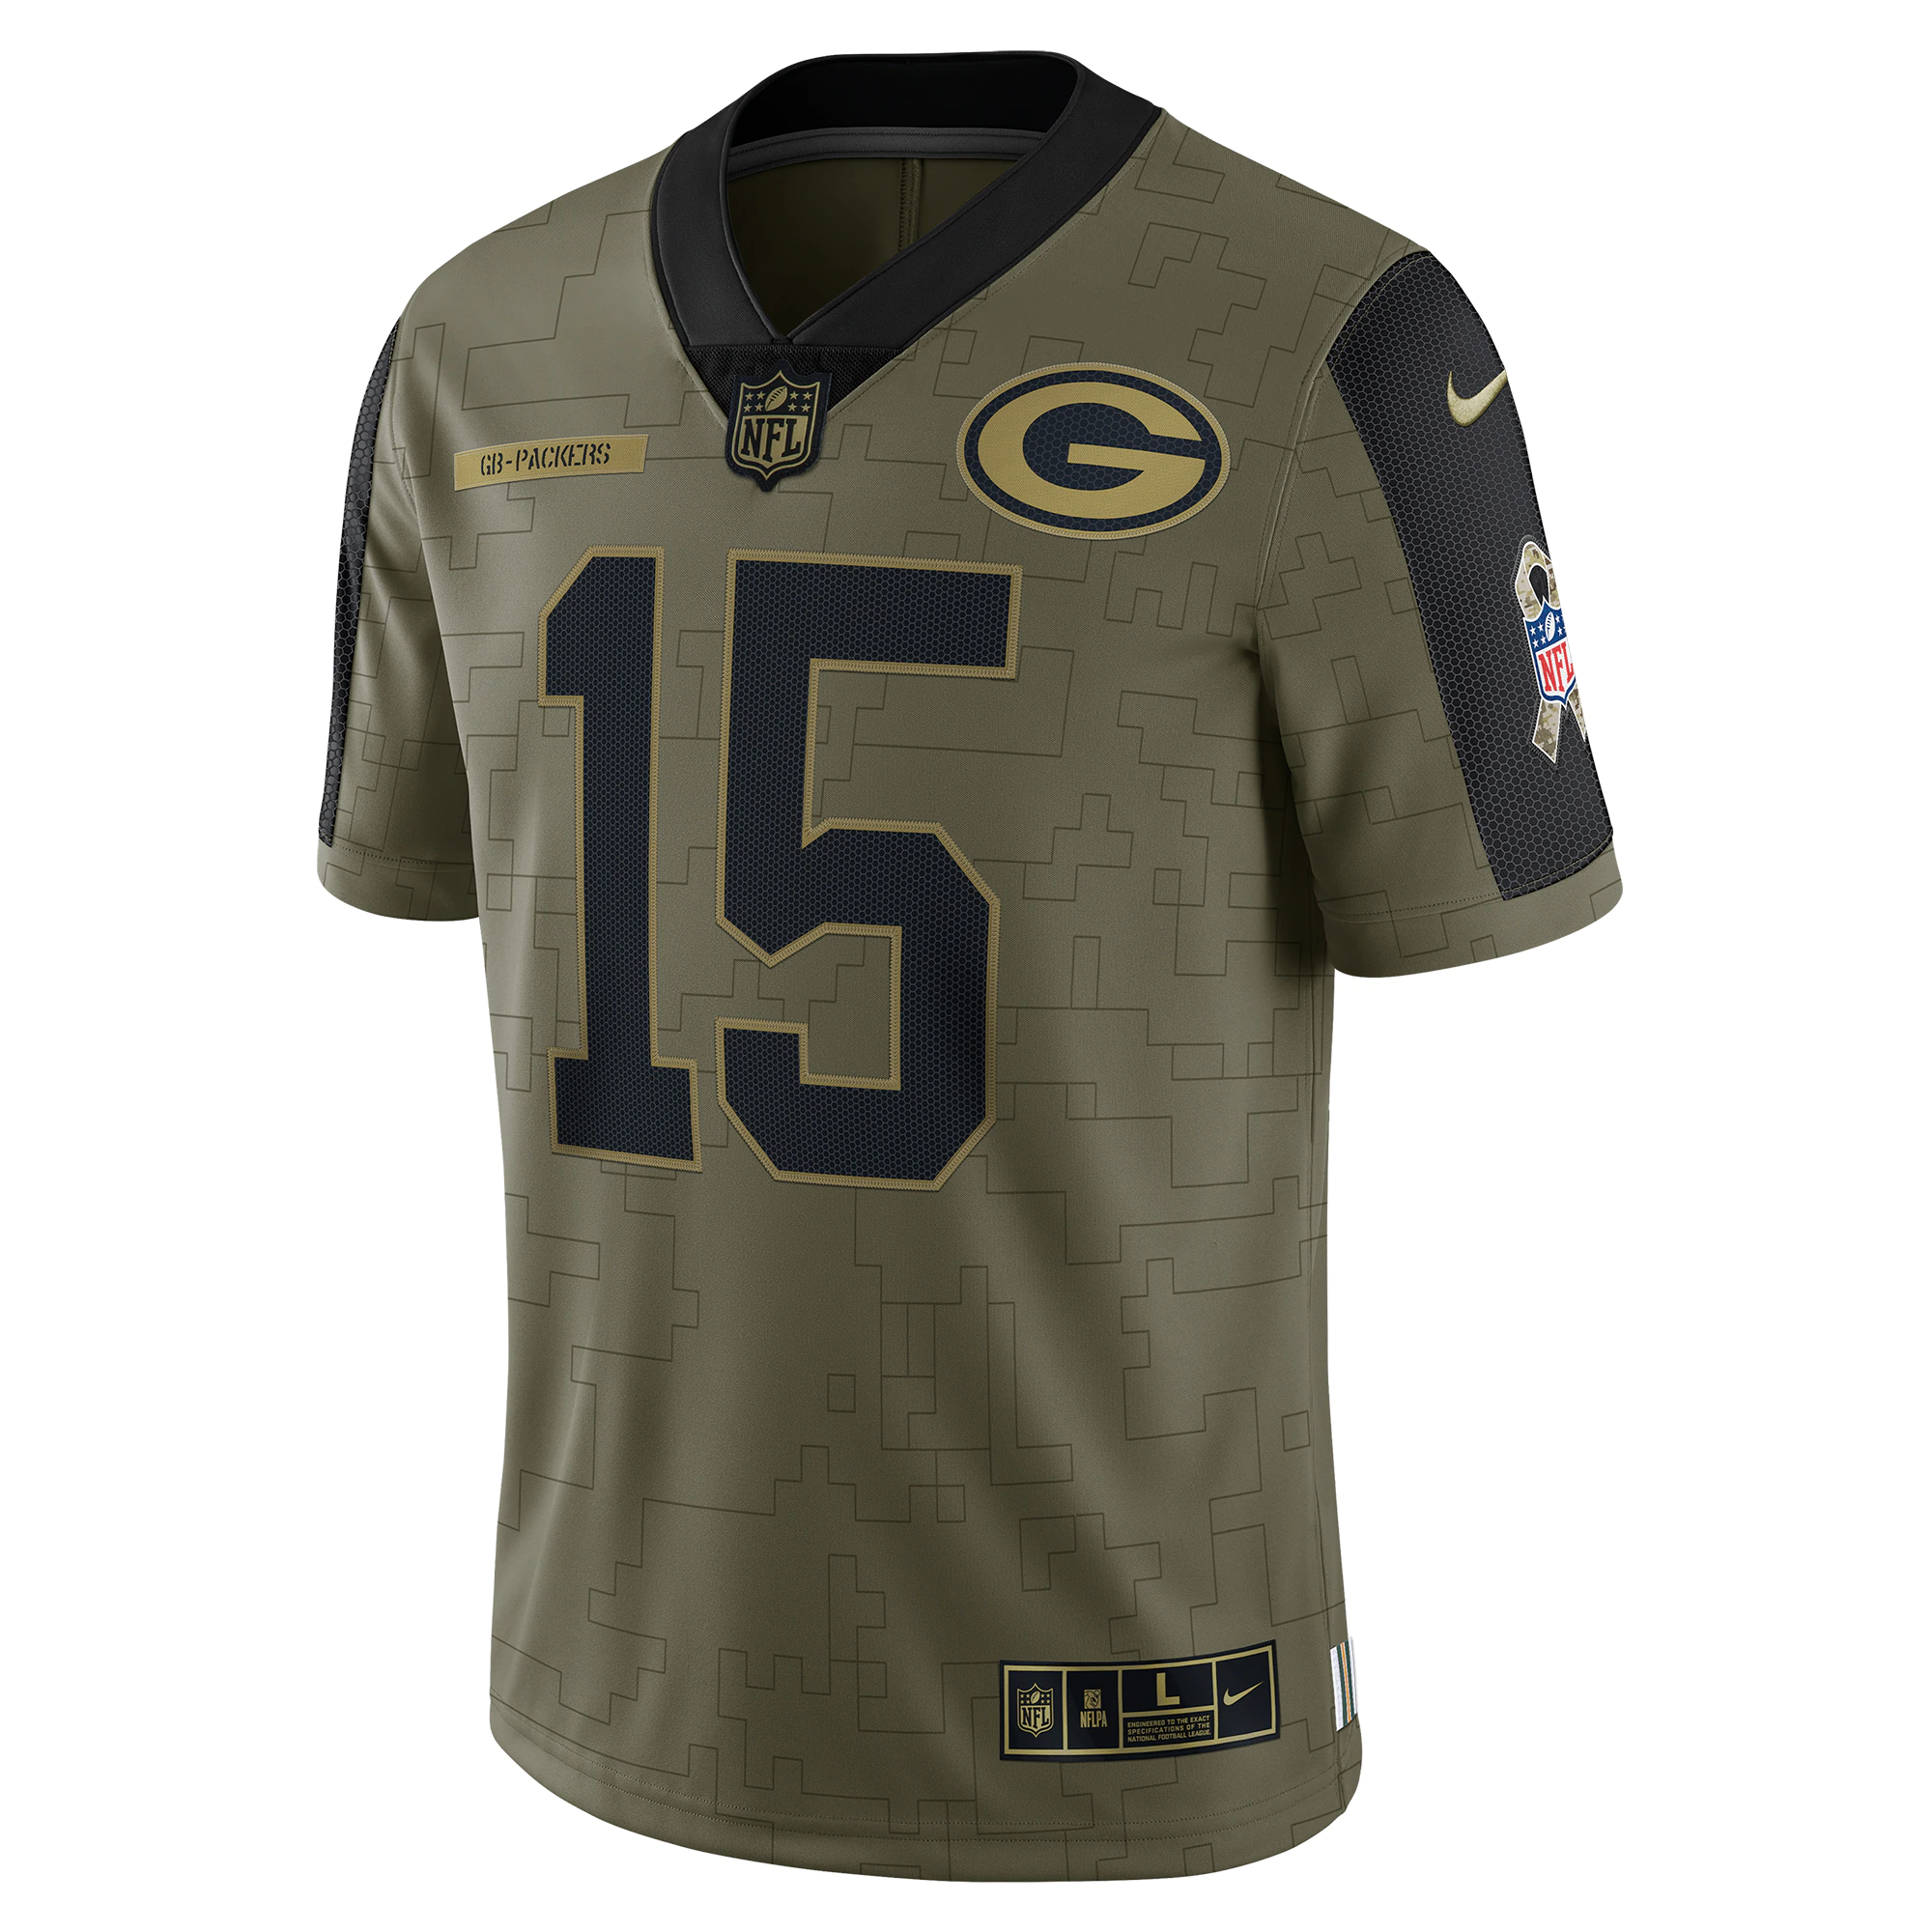 Men's Green Bay Packers Bart Starr Nike Olive 2021 Salute To Service Retired Player Limited Jersey